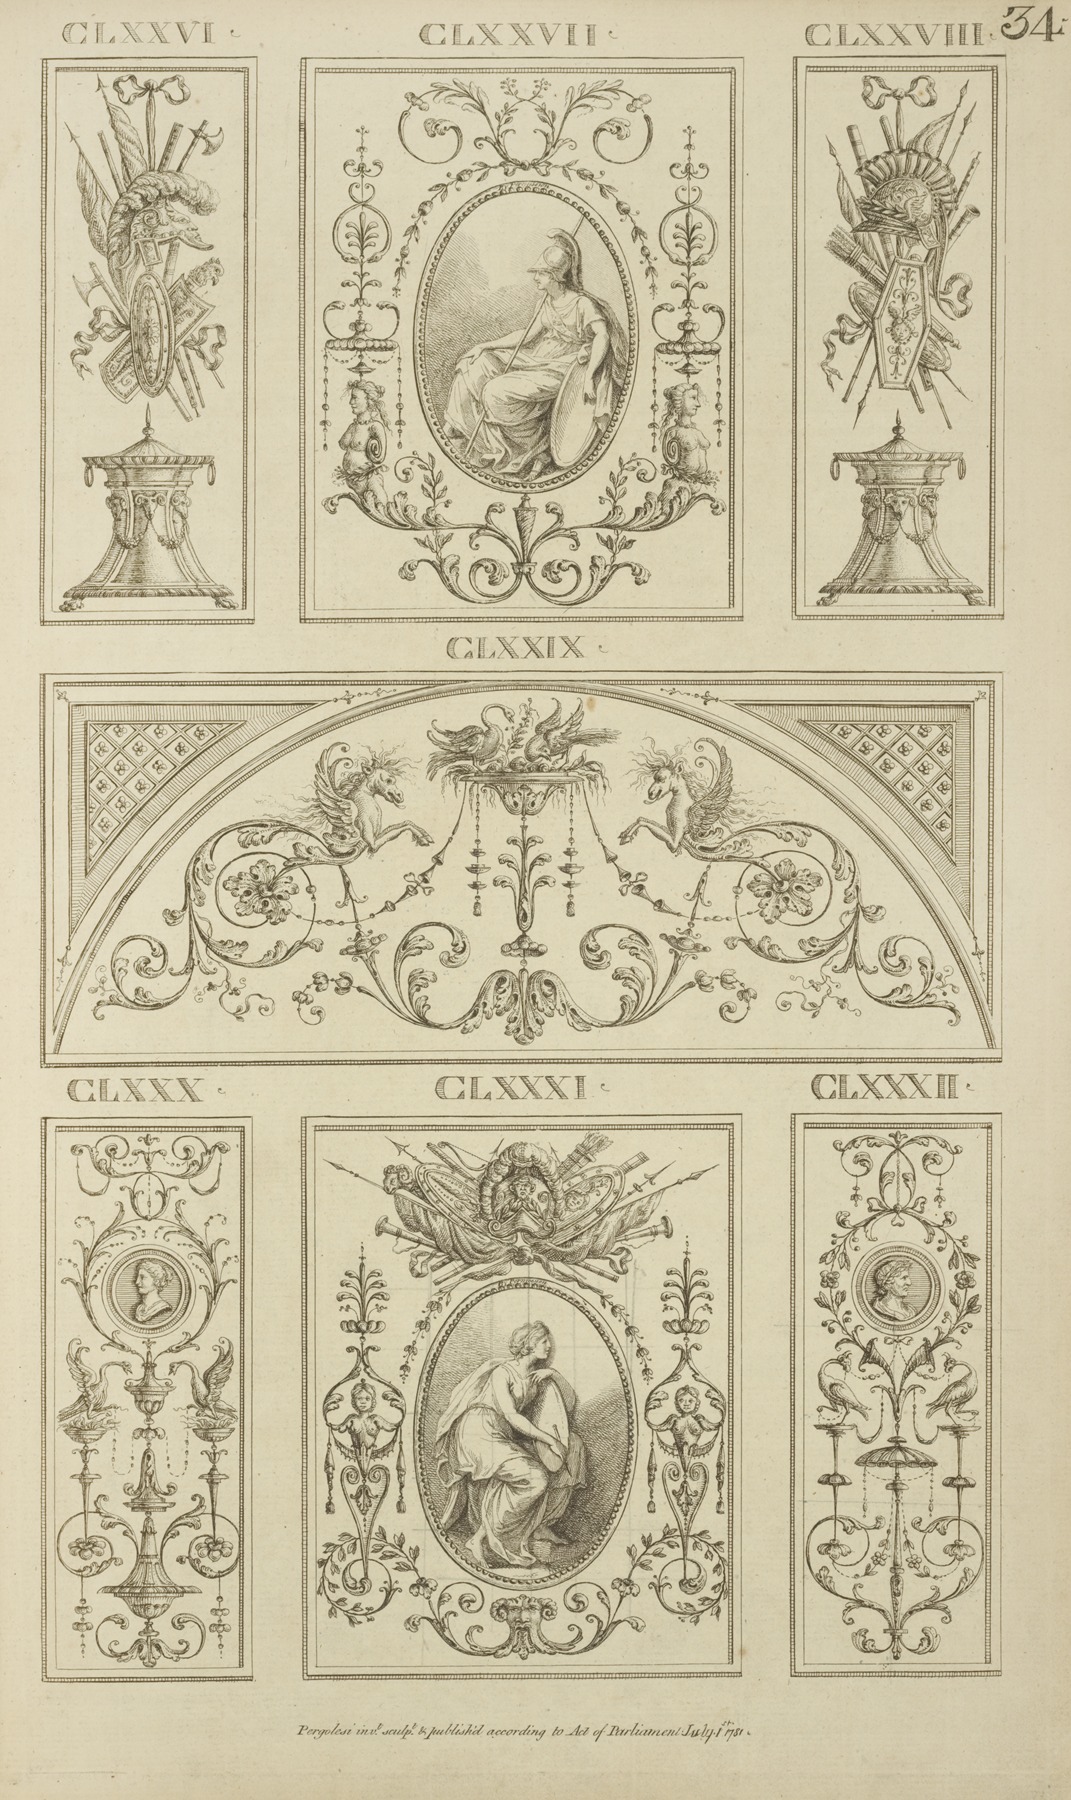 Michel Angelo Pergolesi - Central tympanum-shaped ornamental design with curling vegetal shapes, sea-monsters, and birds.